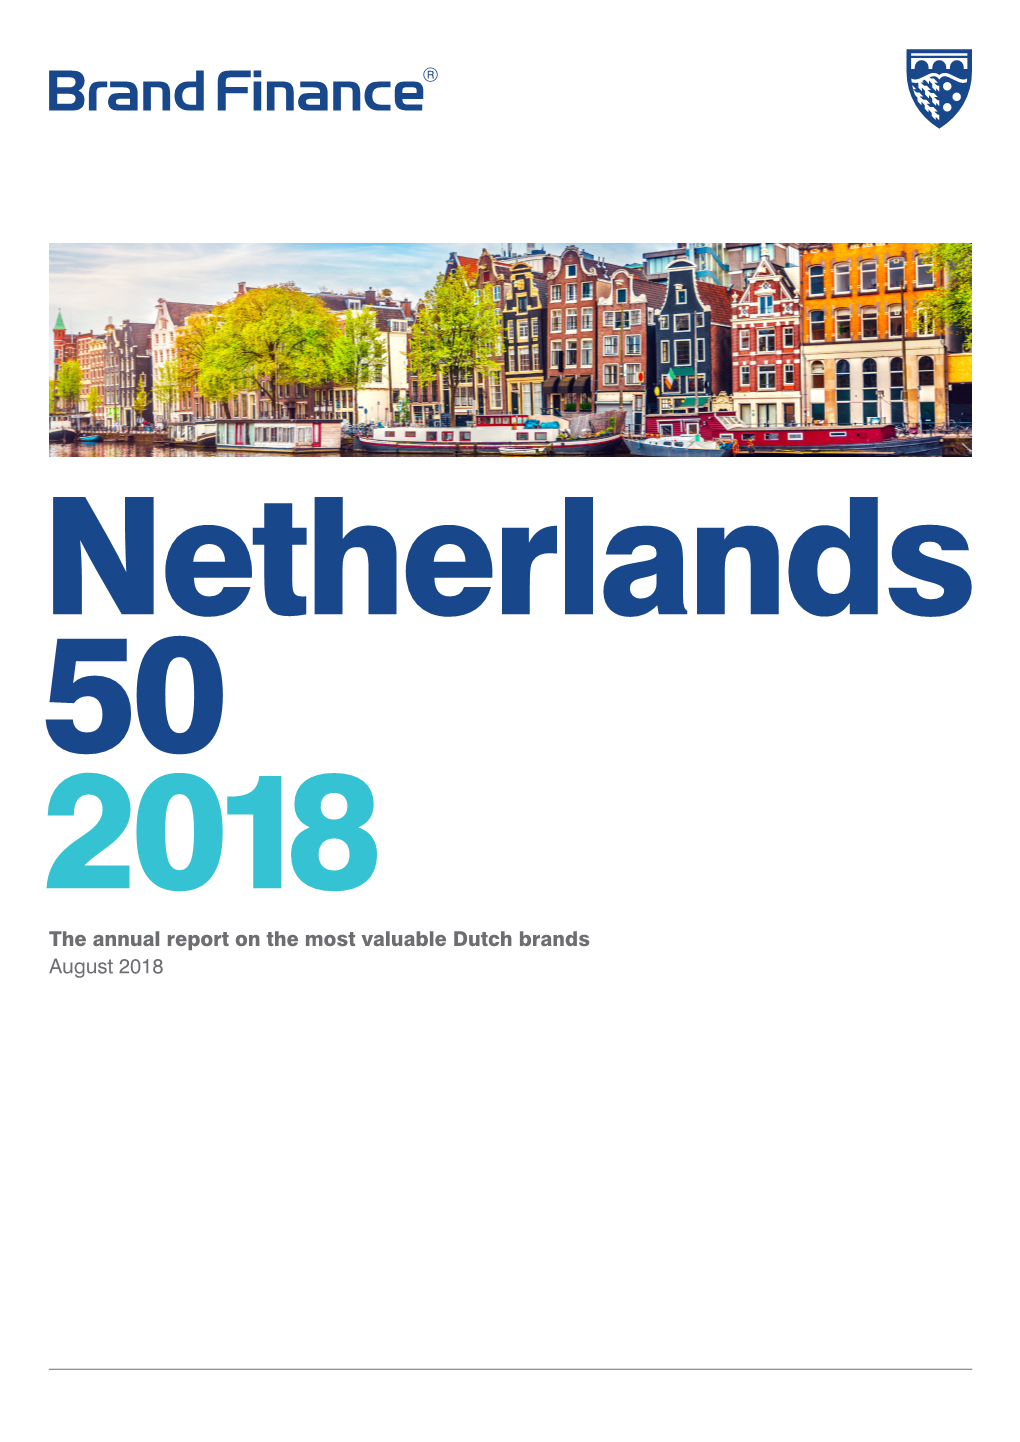 The Annual Report on the Most Valuable Dutch Brands August 2018 Foreword